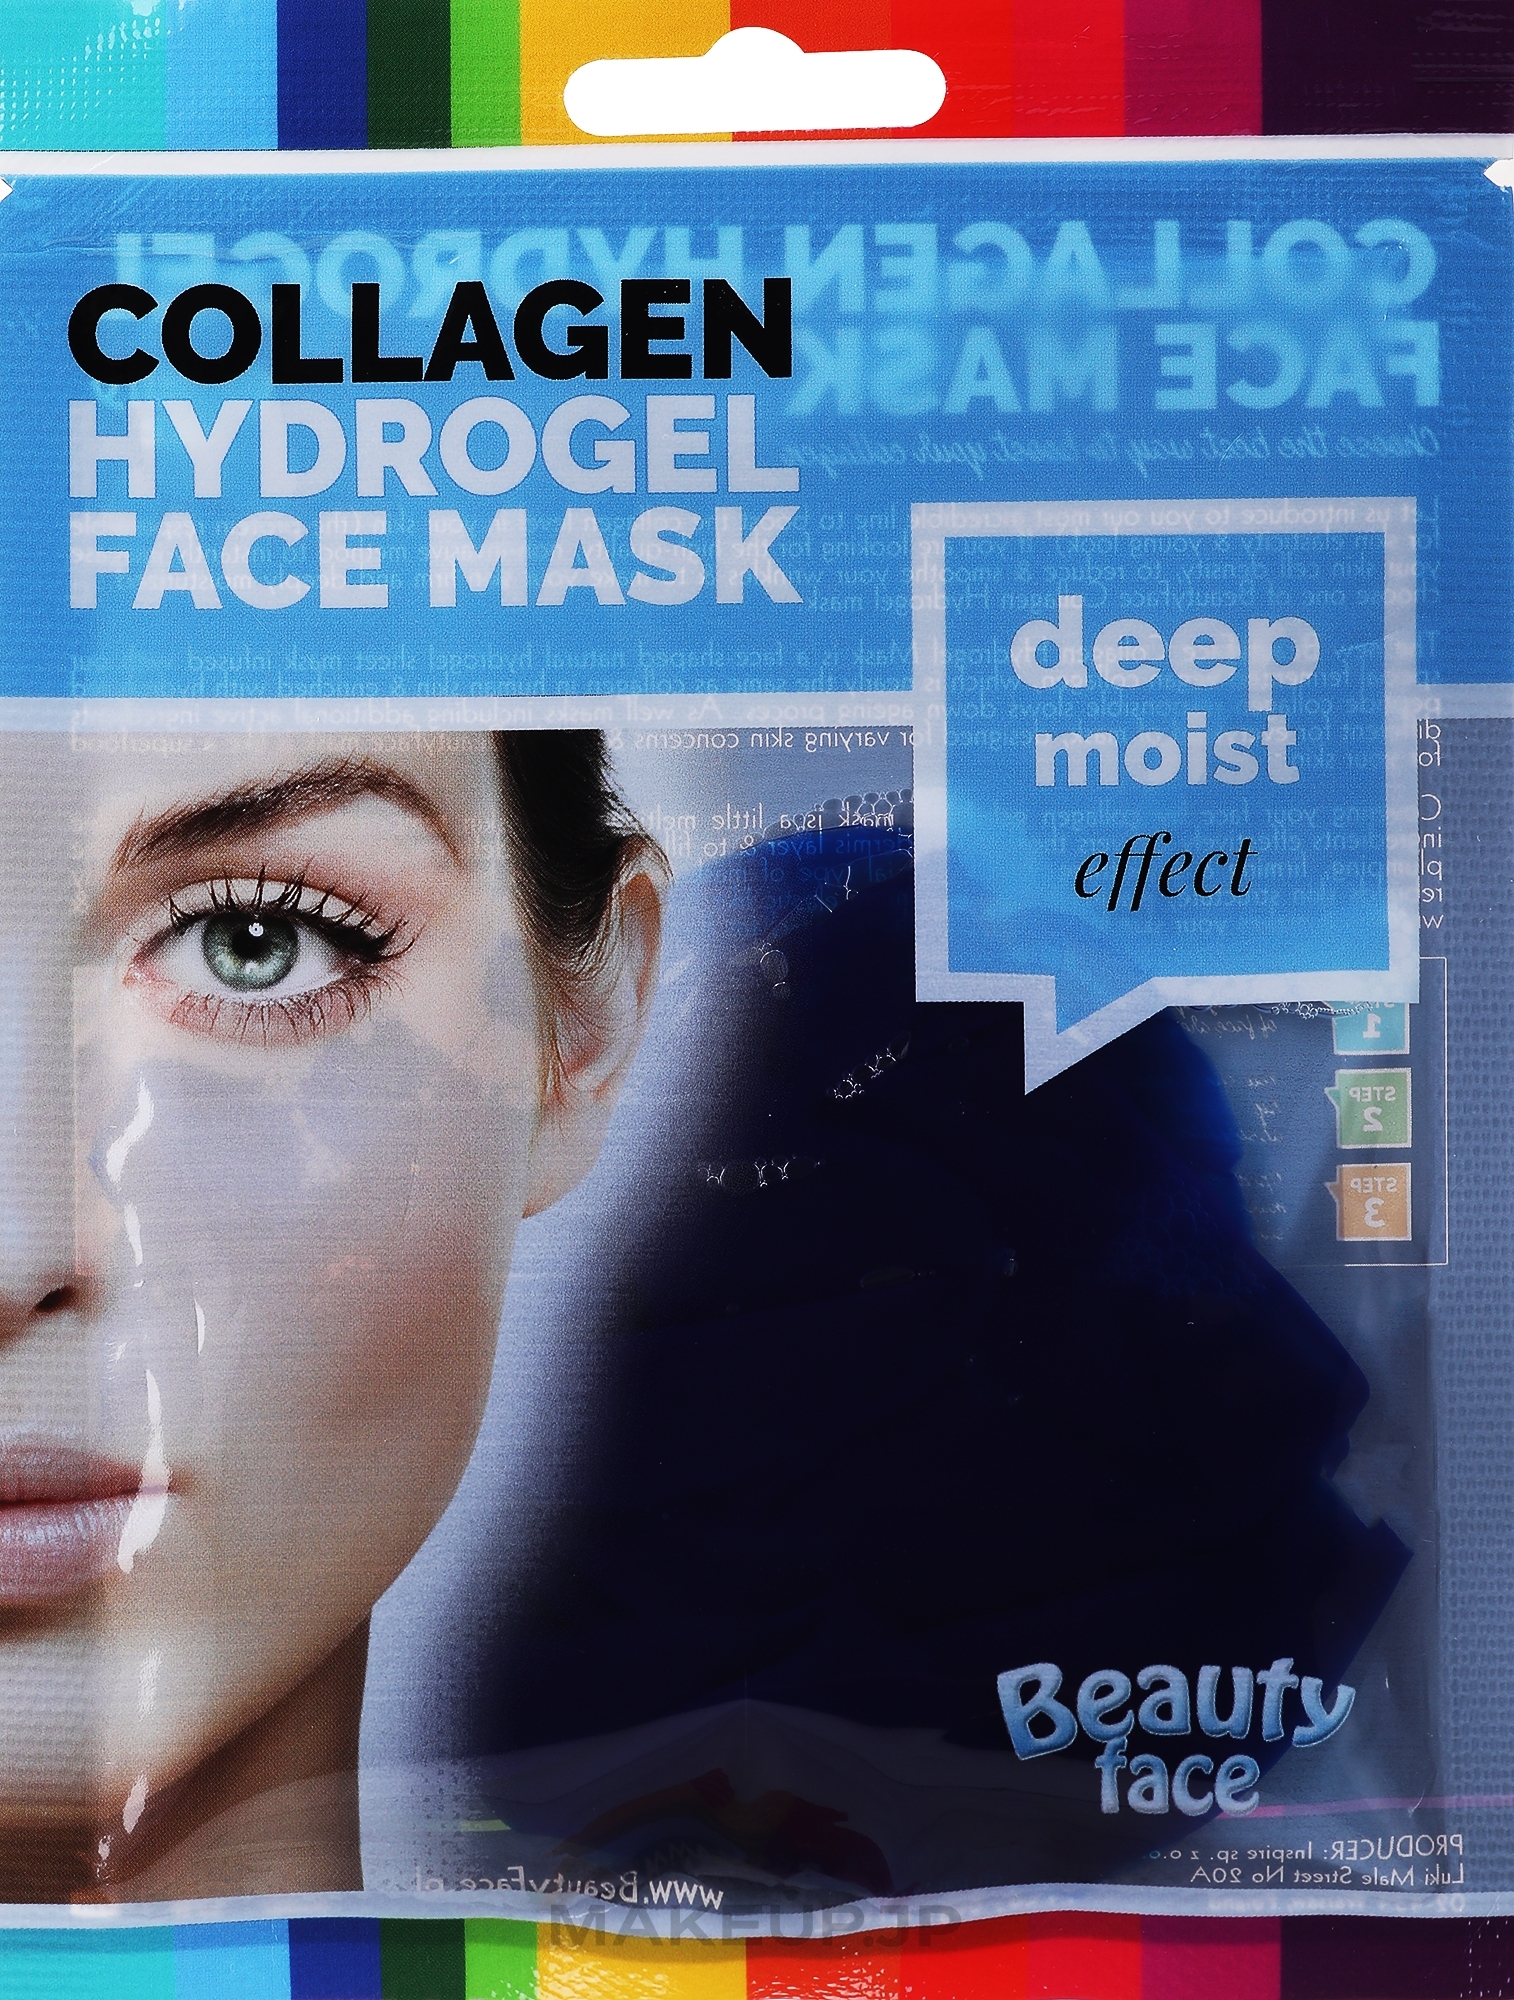 Collagen Treatment Seaweed Mask - Beauty Face Collagen Hydrogel Mask — photo 60 g